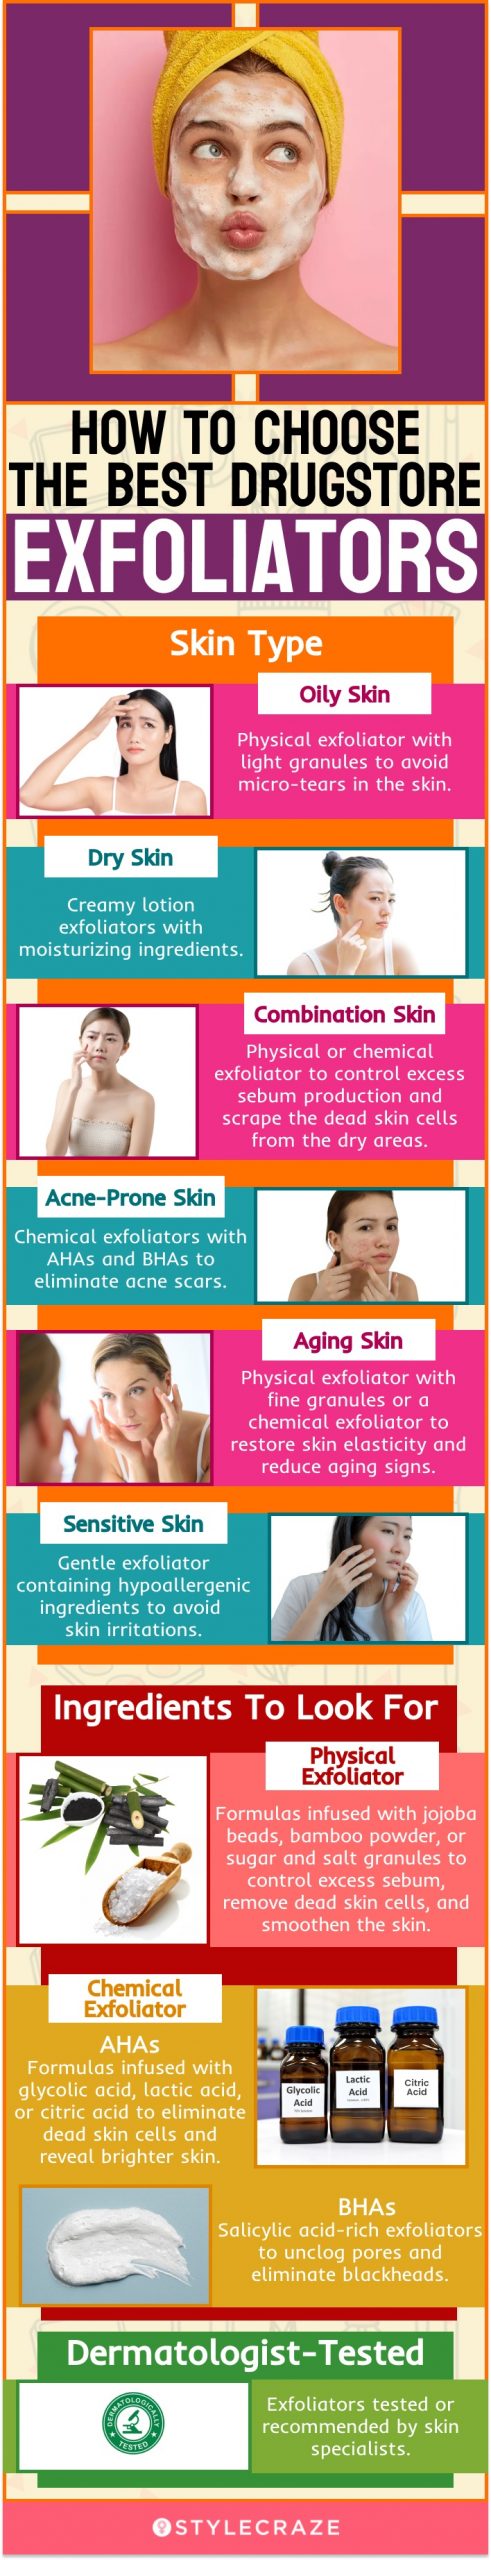 How To Choose The Best Drugstore Exfoliators (infographic)